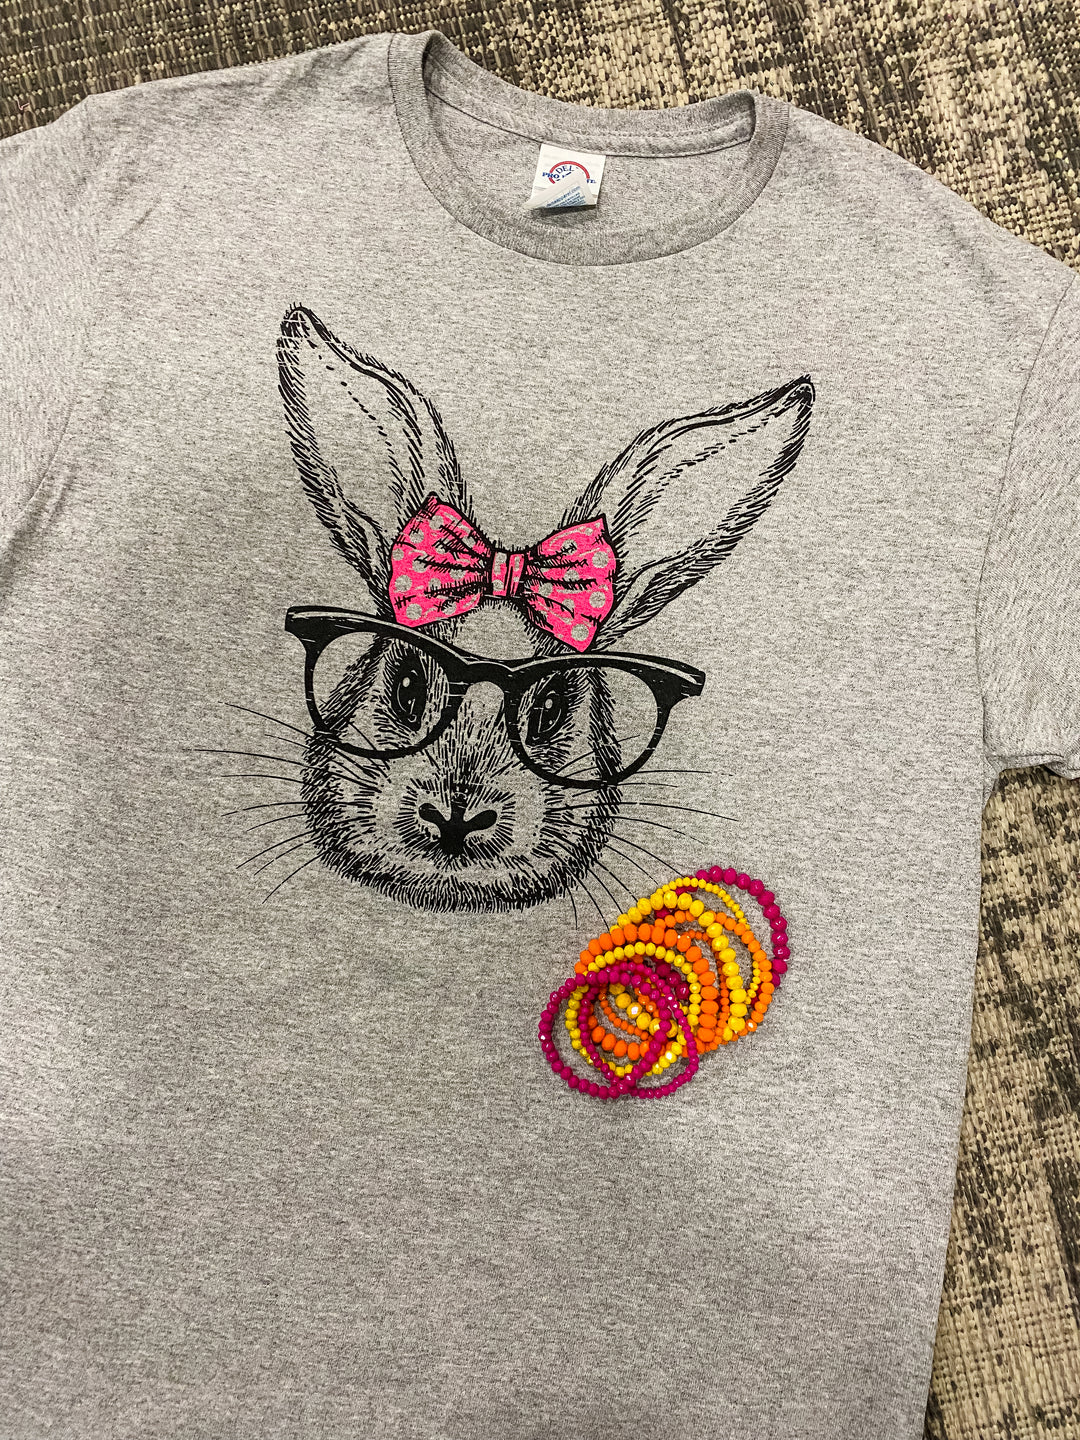 S-2X Grey- Bunny with Pink Bow